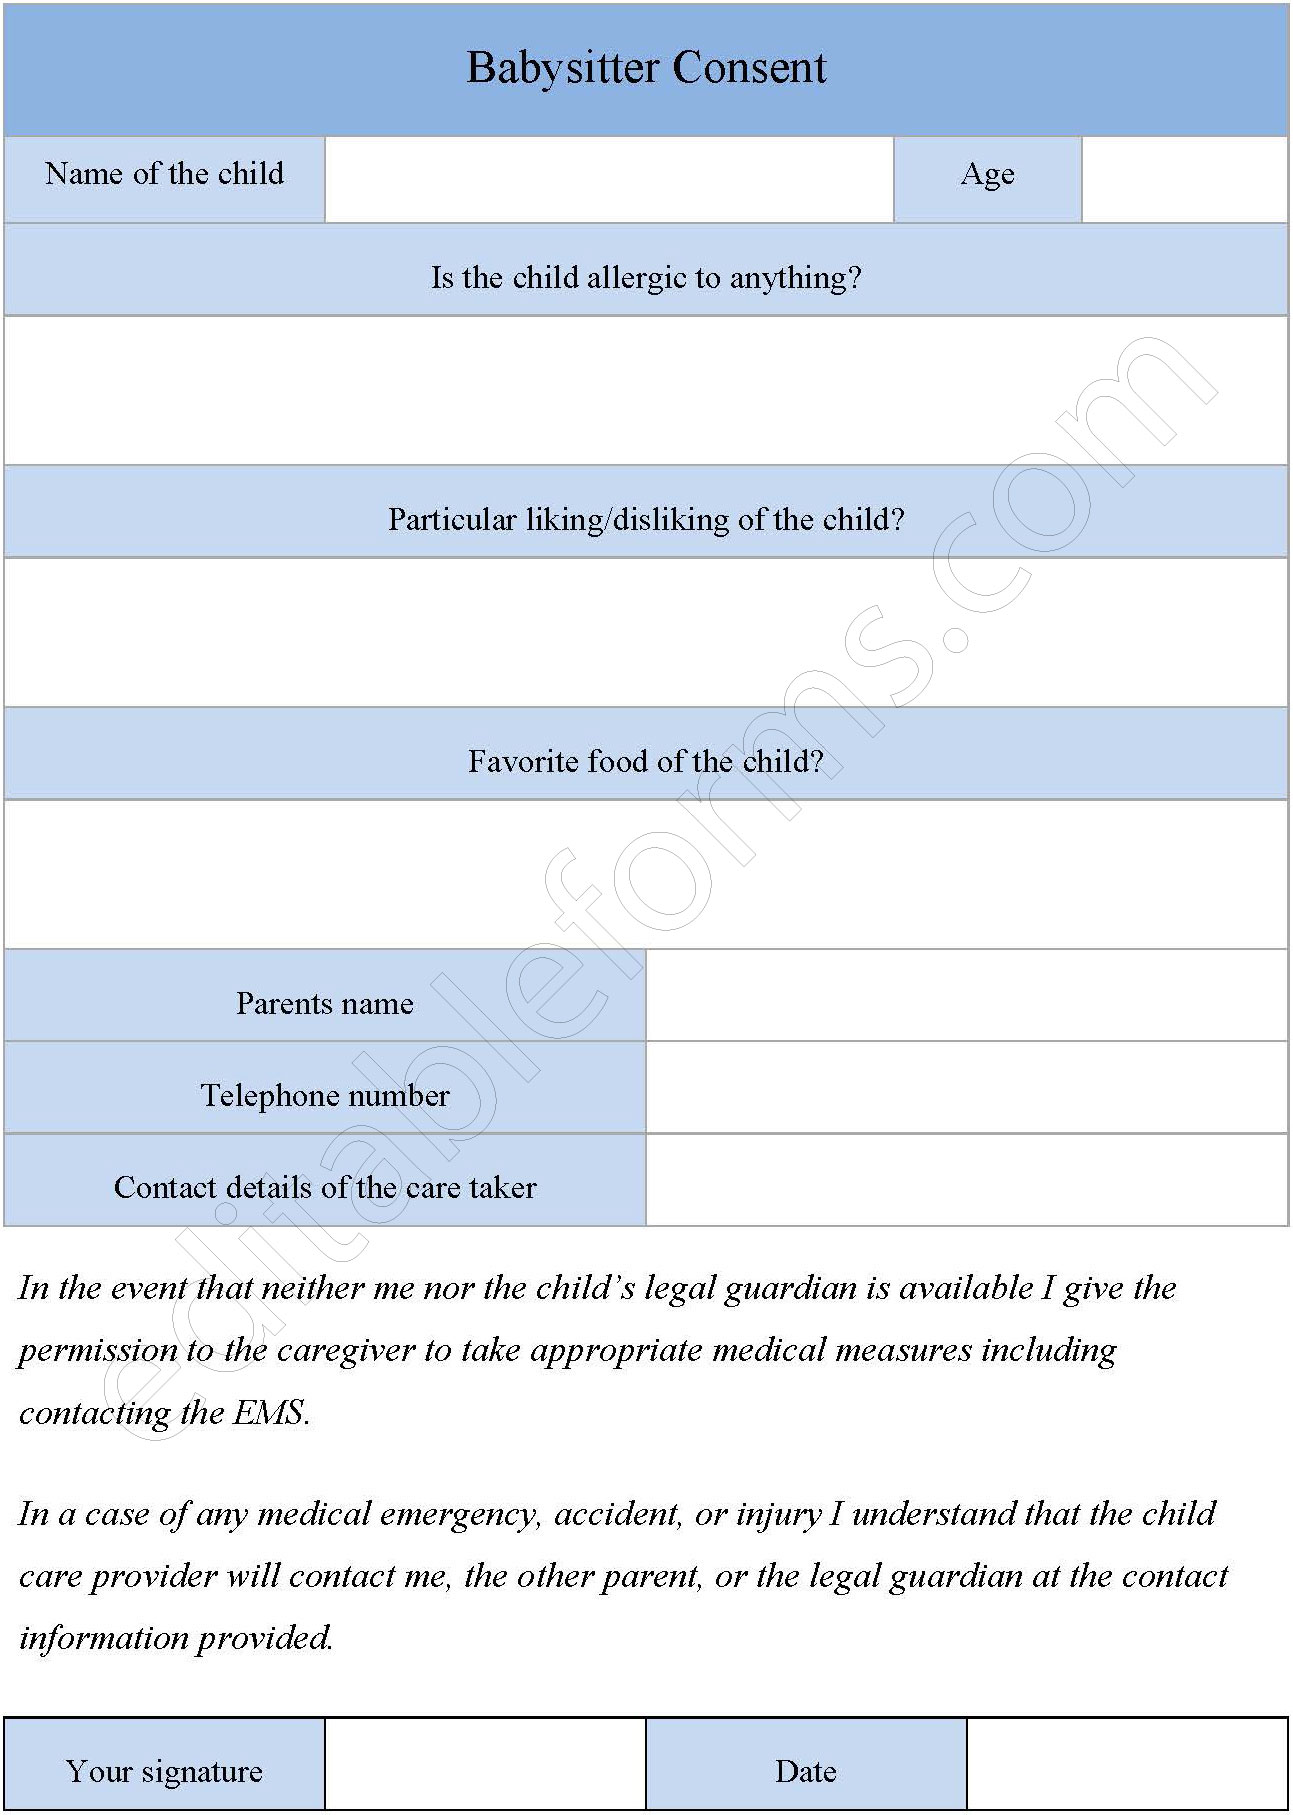 Babysitter consent forms